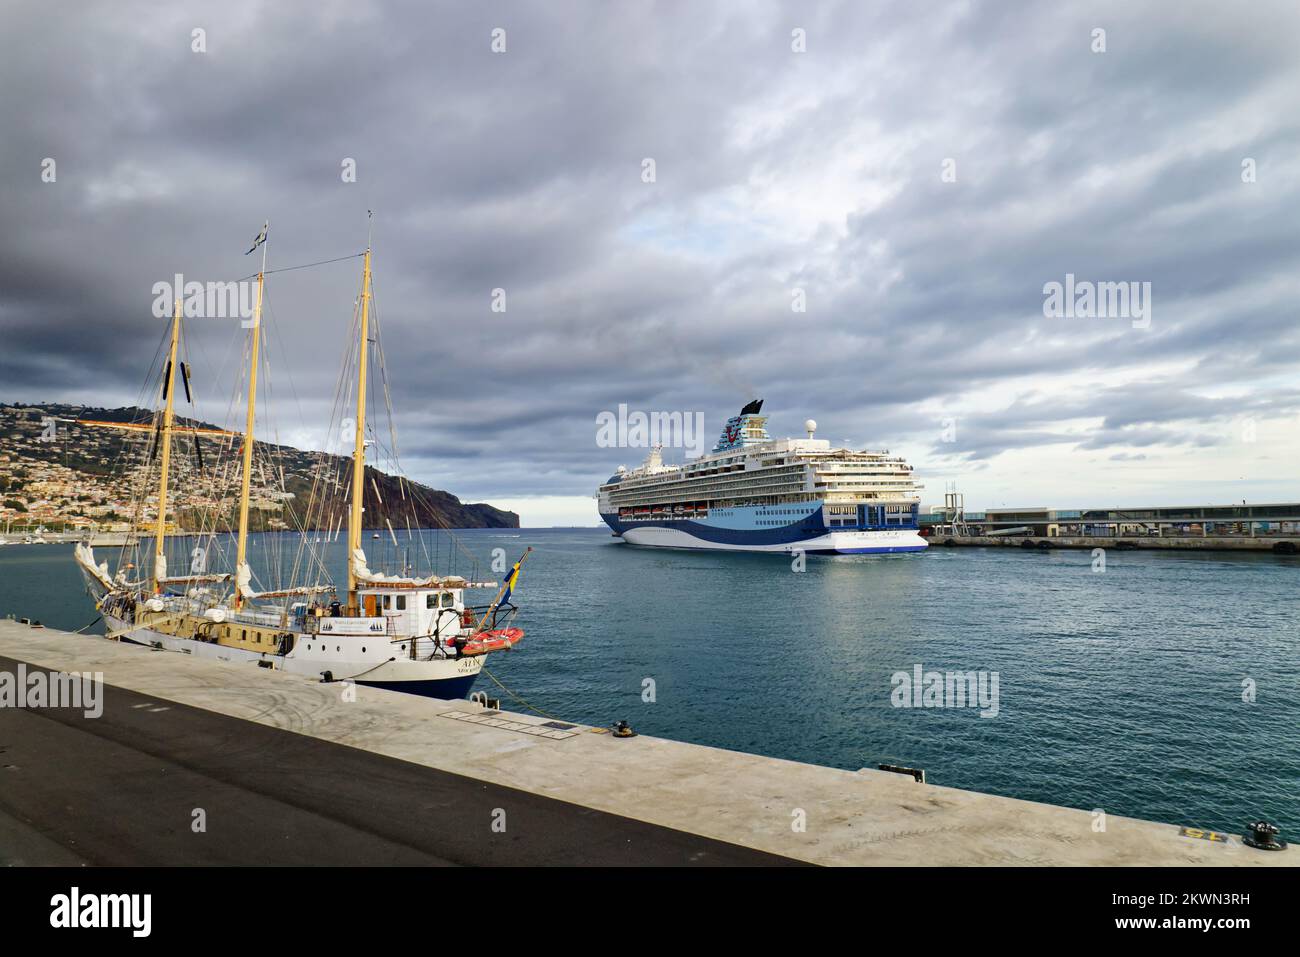 Funchal, Madeira - Cruise ship in Funchal harbour with three masted tall ship in foreground Stock Photo